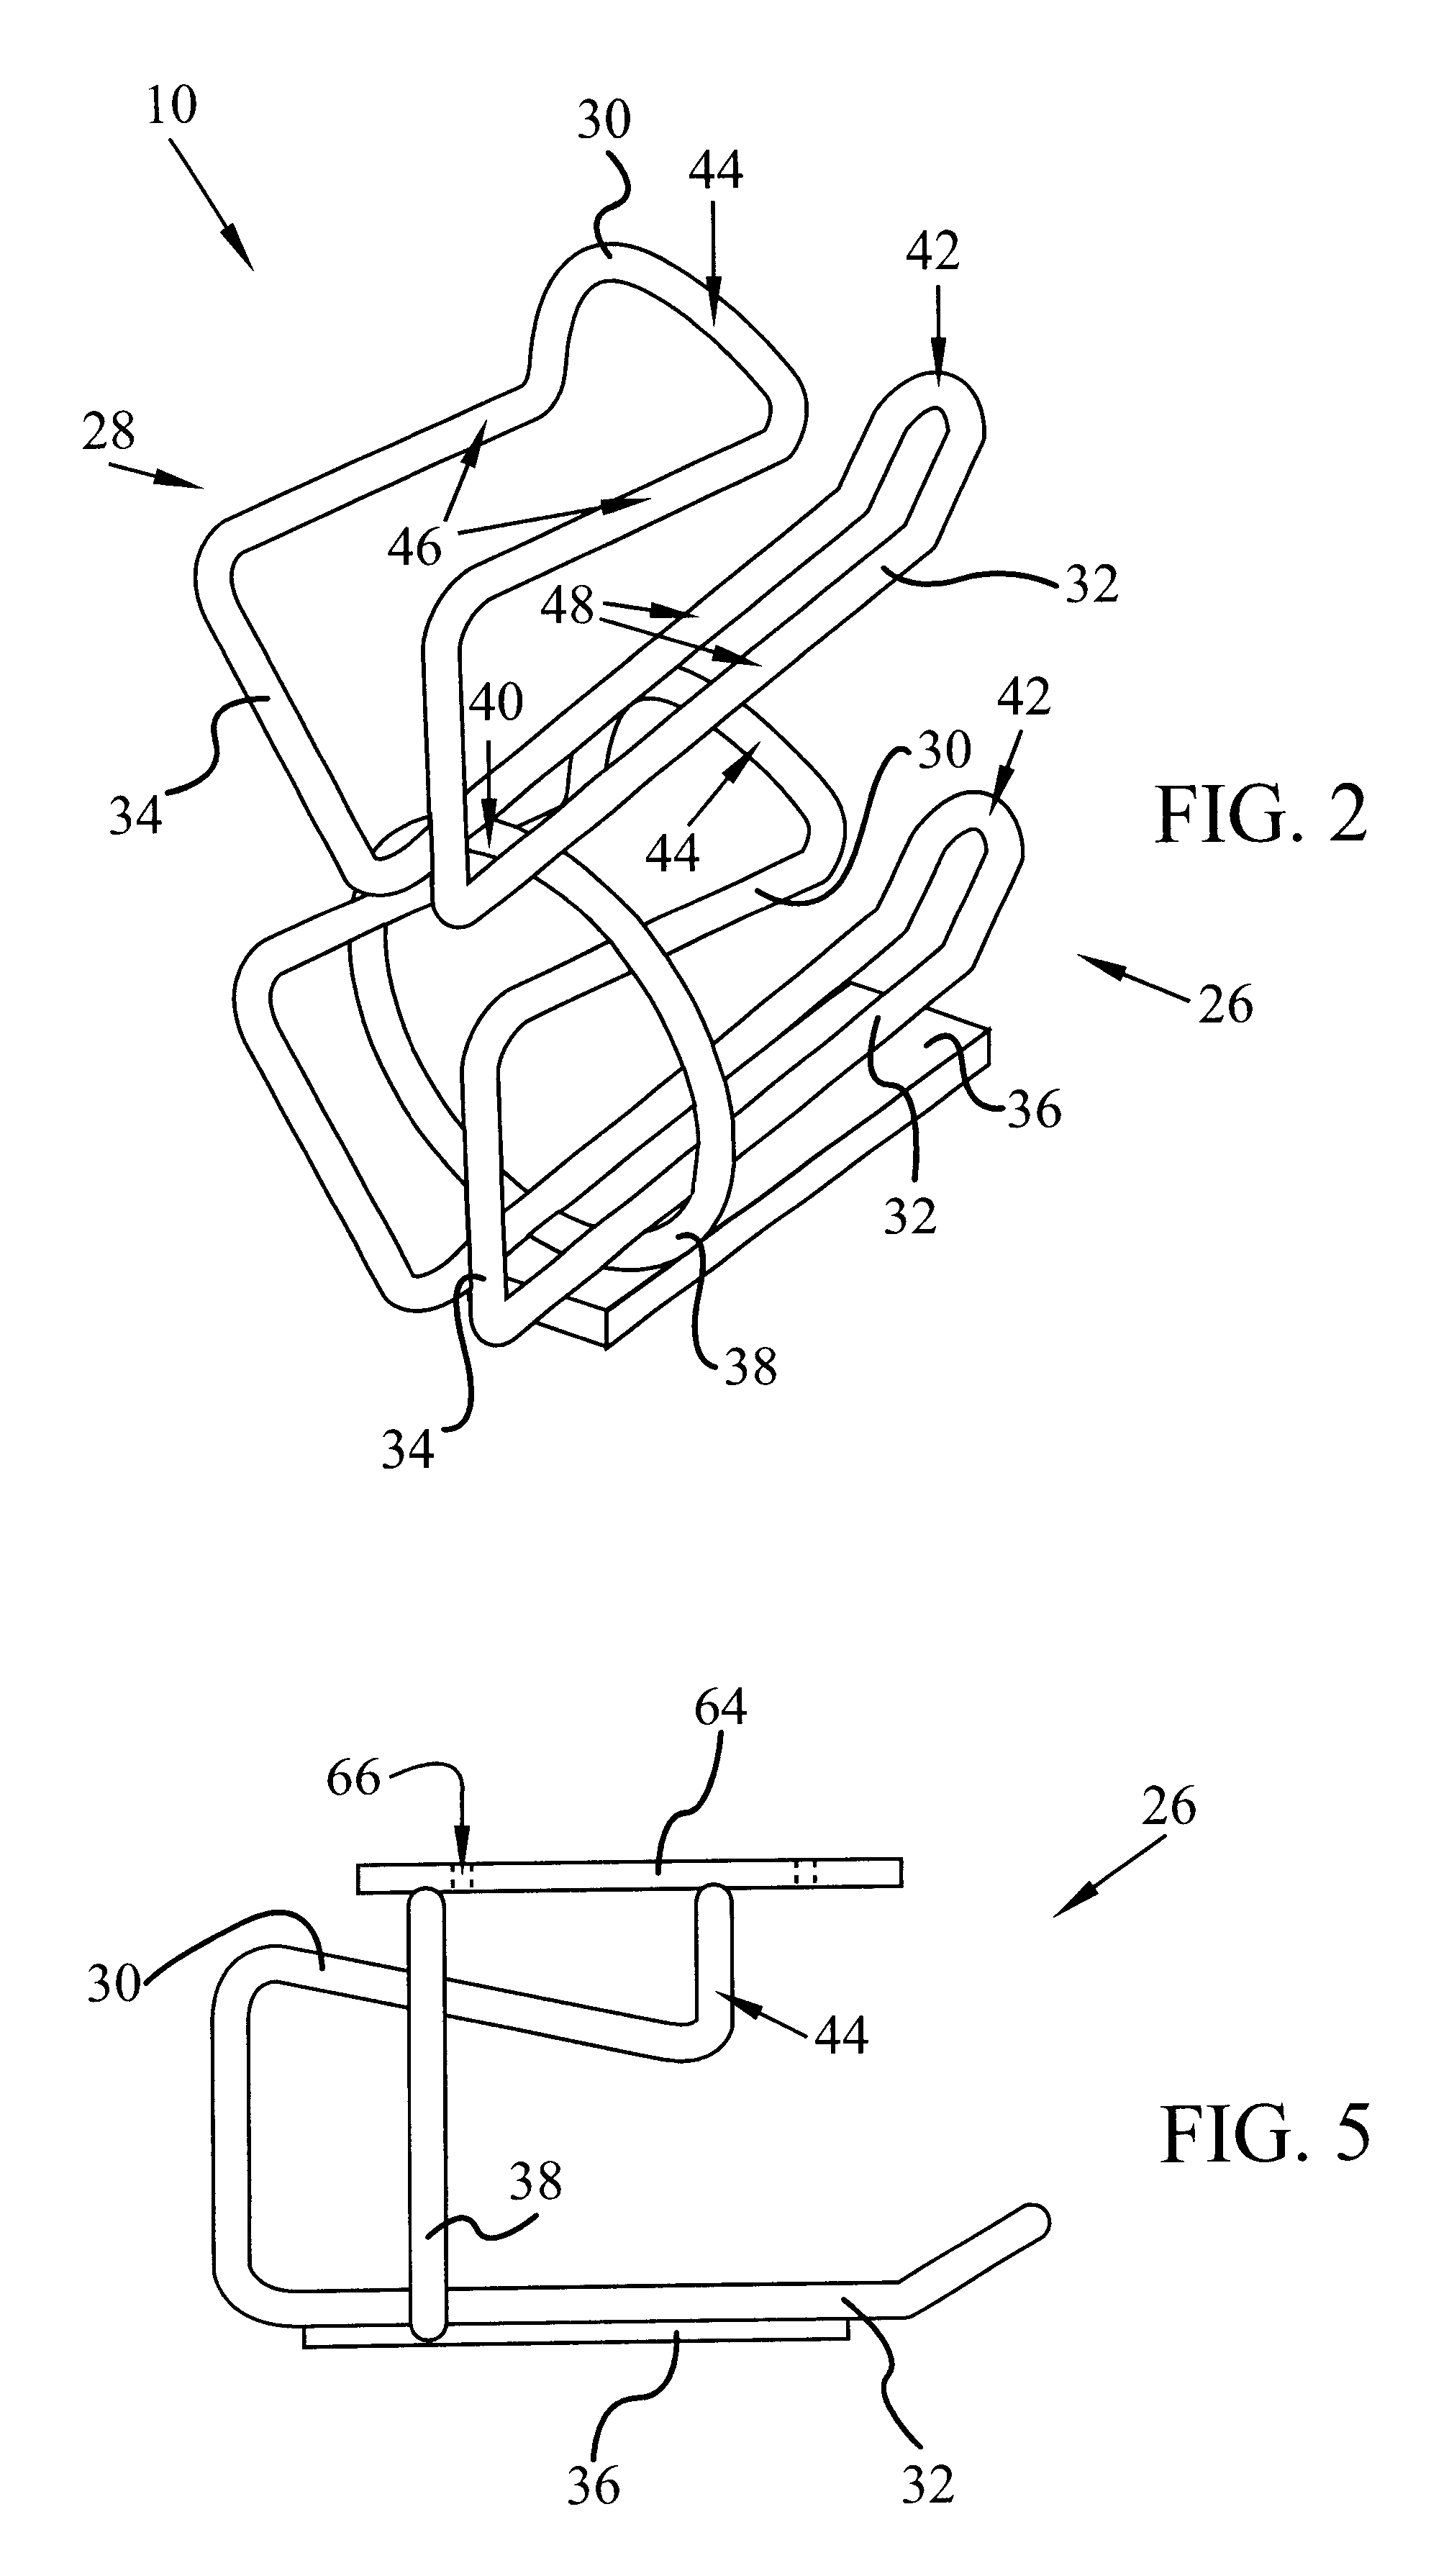 Bicycle-mounted accessory transport system